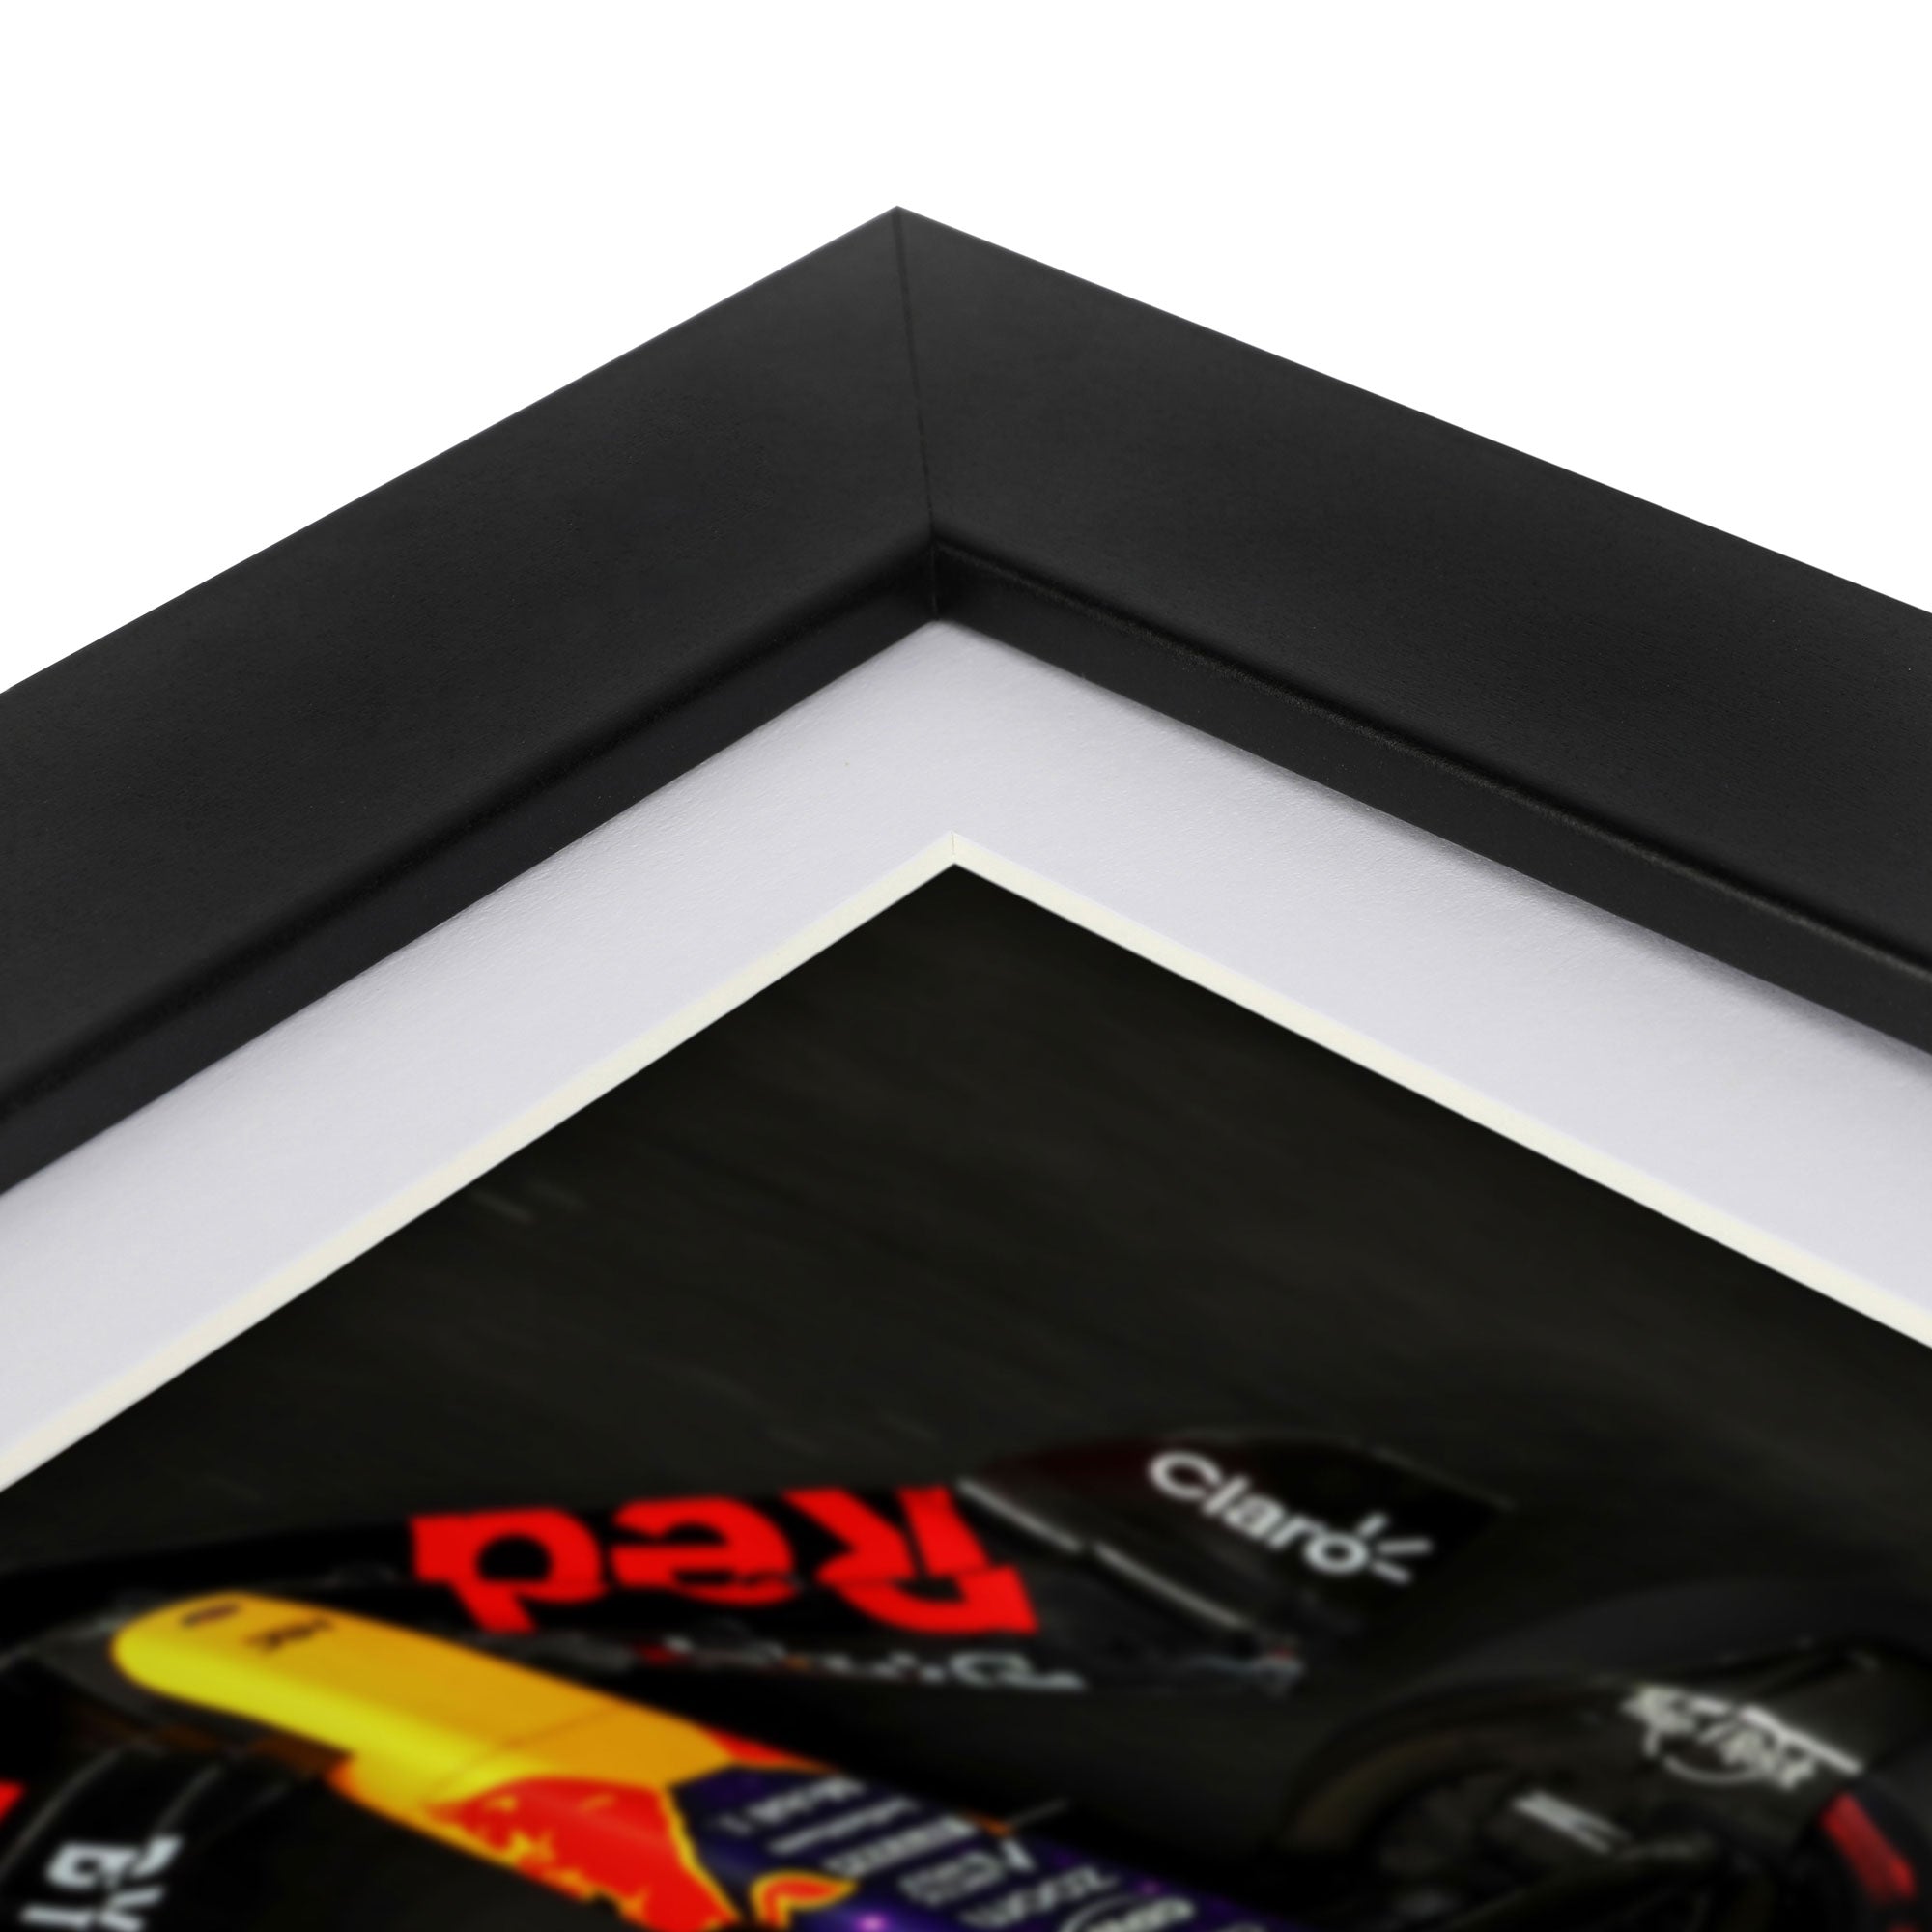 Limited-Edition Max Verstappen 2023 Oracle Red Bull Racing Replica Bodywork & Photo – Vegas GP Edition